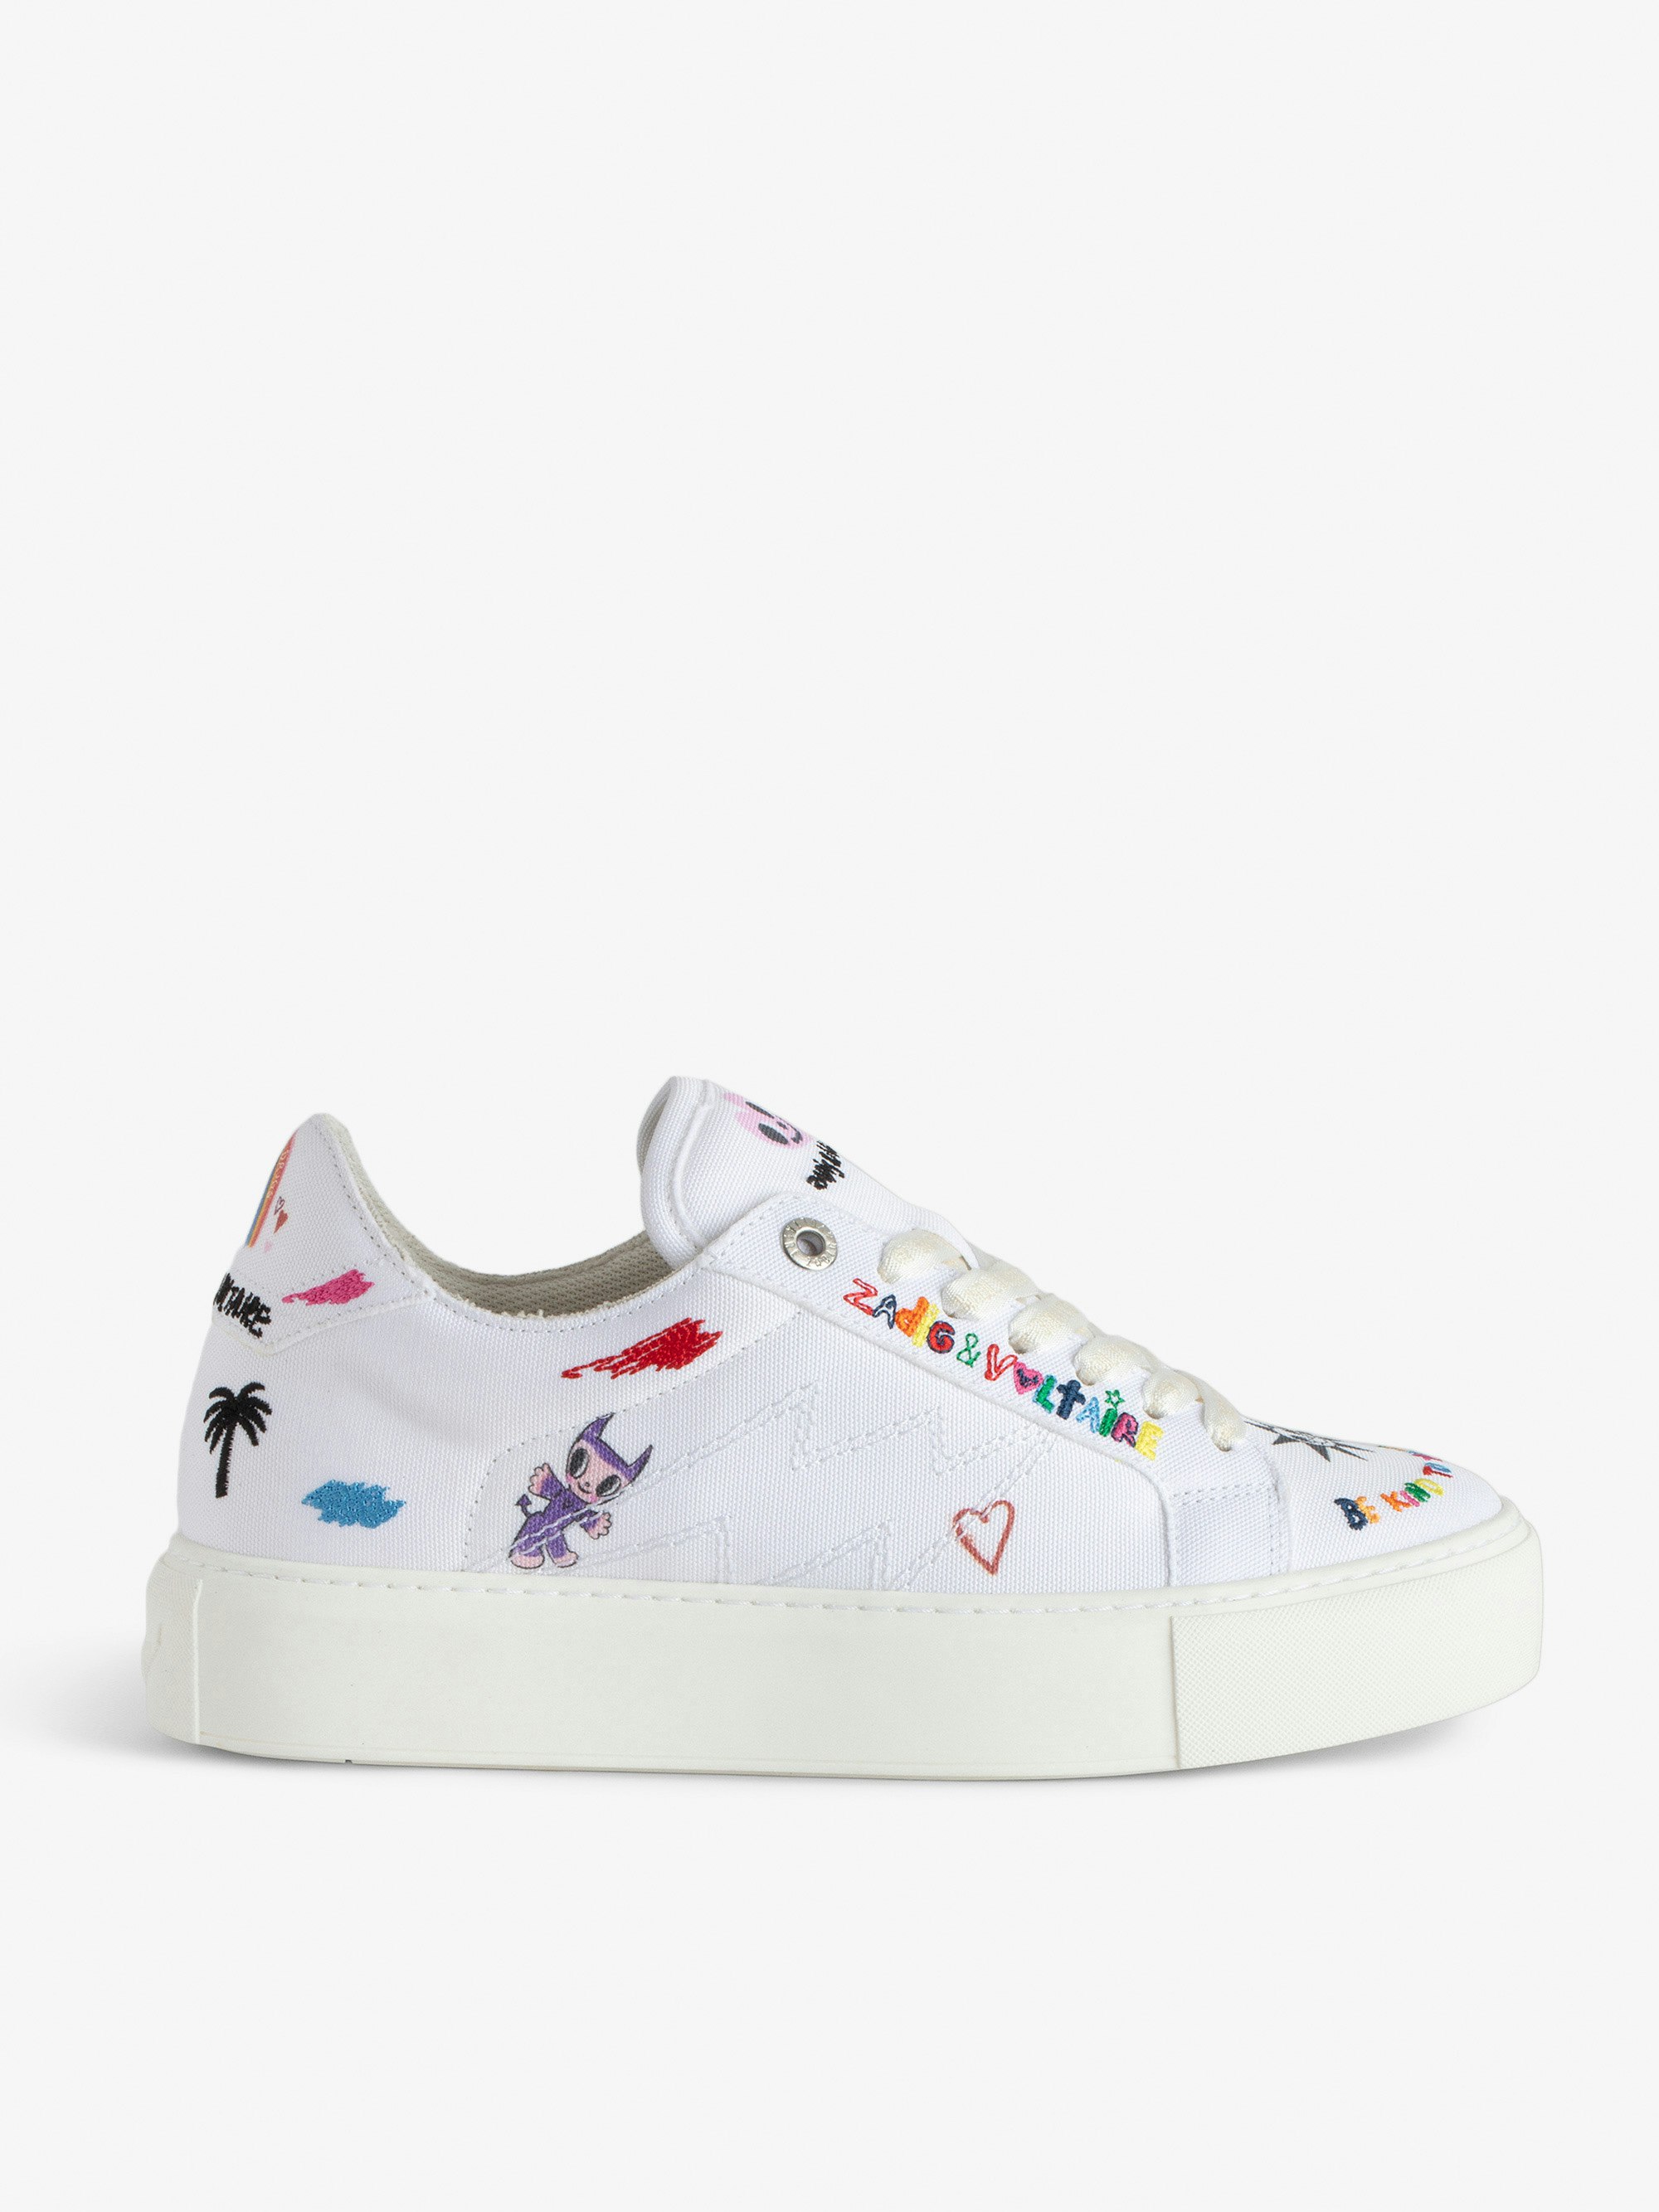 ZV1747 La Flash Chunky Low-Top Sneakers - White canvas low-top trainers with chunky sole and customized details designed by Humberto Cruz.